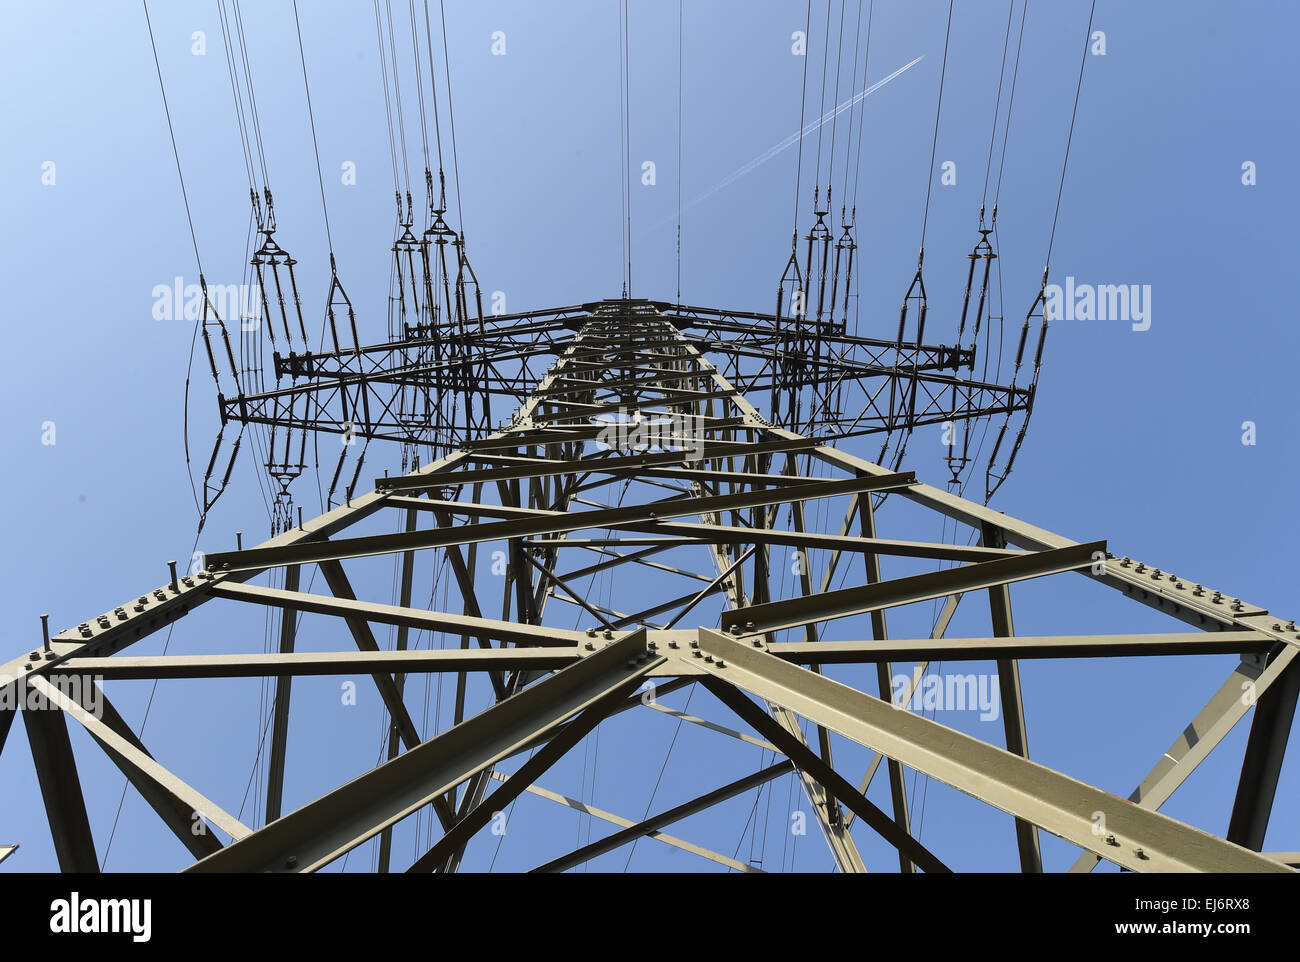 Karlsruhe, Germany. 20th Mar, 2015. ILLUSTRATION - A pylon in Karlsruhe, Germany, 20 March 2015. On Monday 23 March 2015 TransnetBW will hold a press conference in Altlussheim on the 'Netzausbauprojekt ULTRANET' network expansion project. Ultranet constitutes the southern section of one of the planned 'Gleichstrom-Autobahnen' (Direct Current Highways) from northern Germany to the south. TransnetBW manages the transmission network in the federal state of Baden Wuertemberg. Photo: Uli Deck/dpa/Alamy Live News Stock Photo